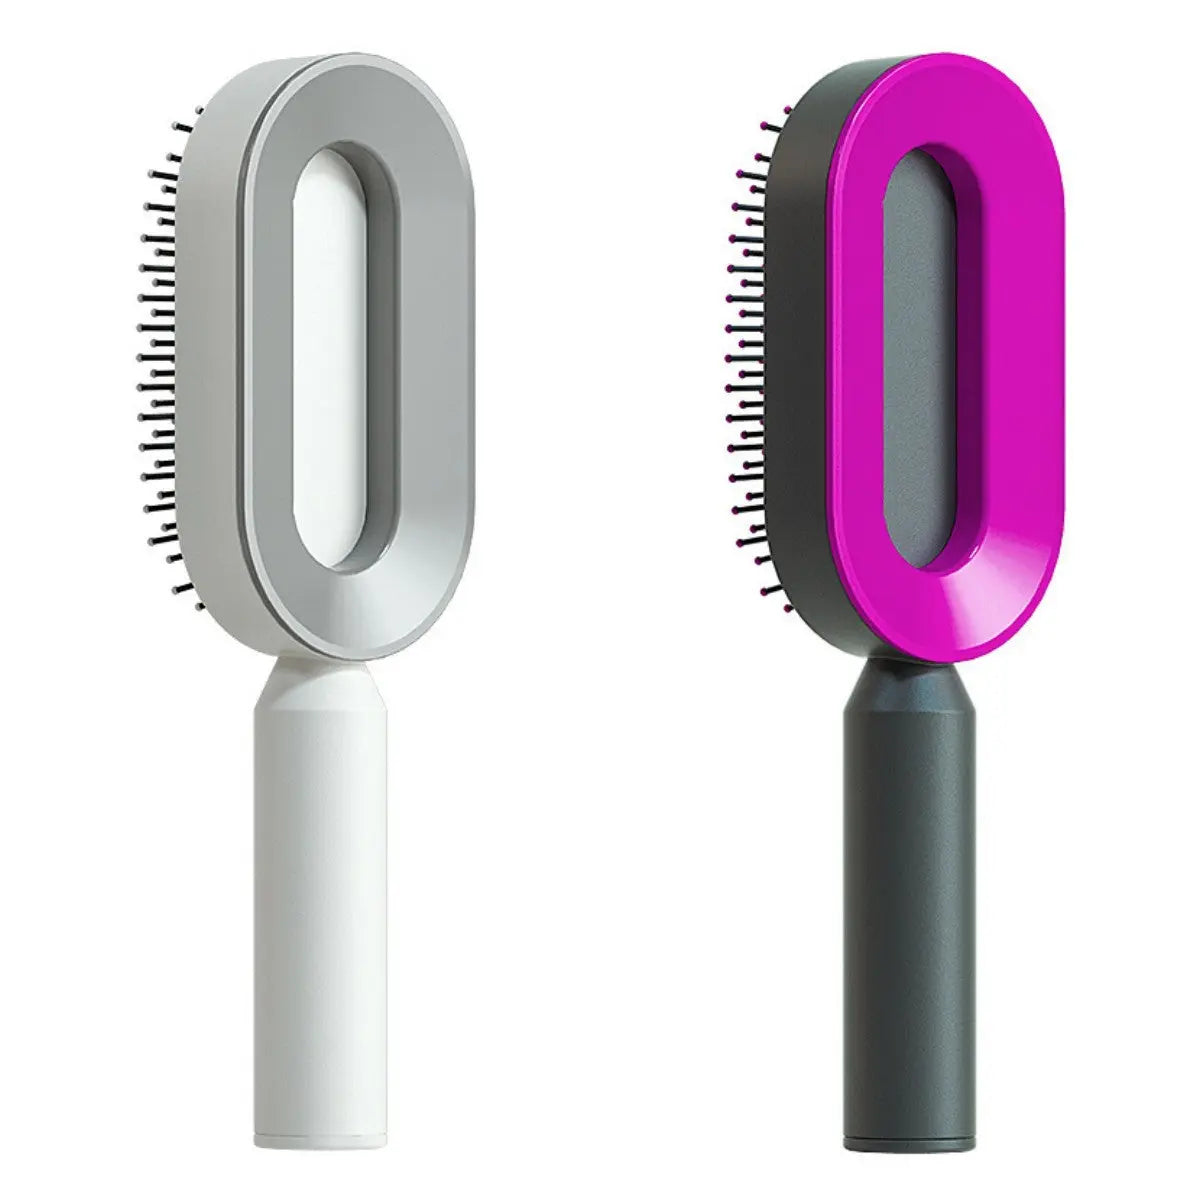 Self Cleaning Hair Brush For Women One-key Cleaning Hair Loss Airbag Massage Scalp Comb Anti-Static Hairbrush - Trending's Arena Beauty Self Cleaning Hair Brush For Women One-key Cleaning Hair Loss Airbag Massage Scalp Comb Anti-Static Hairbrush FACE Set-P